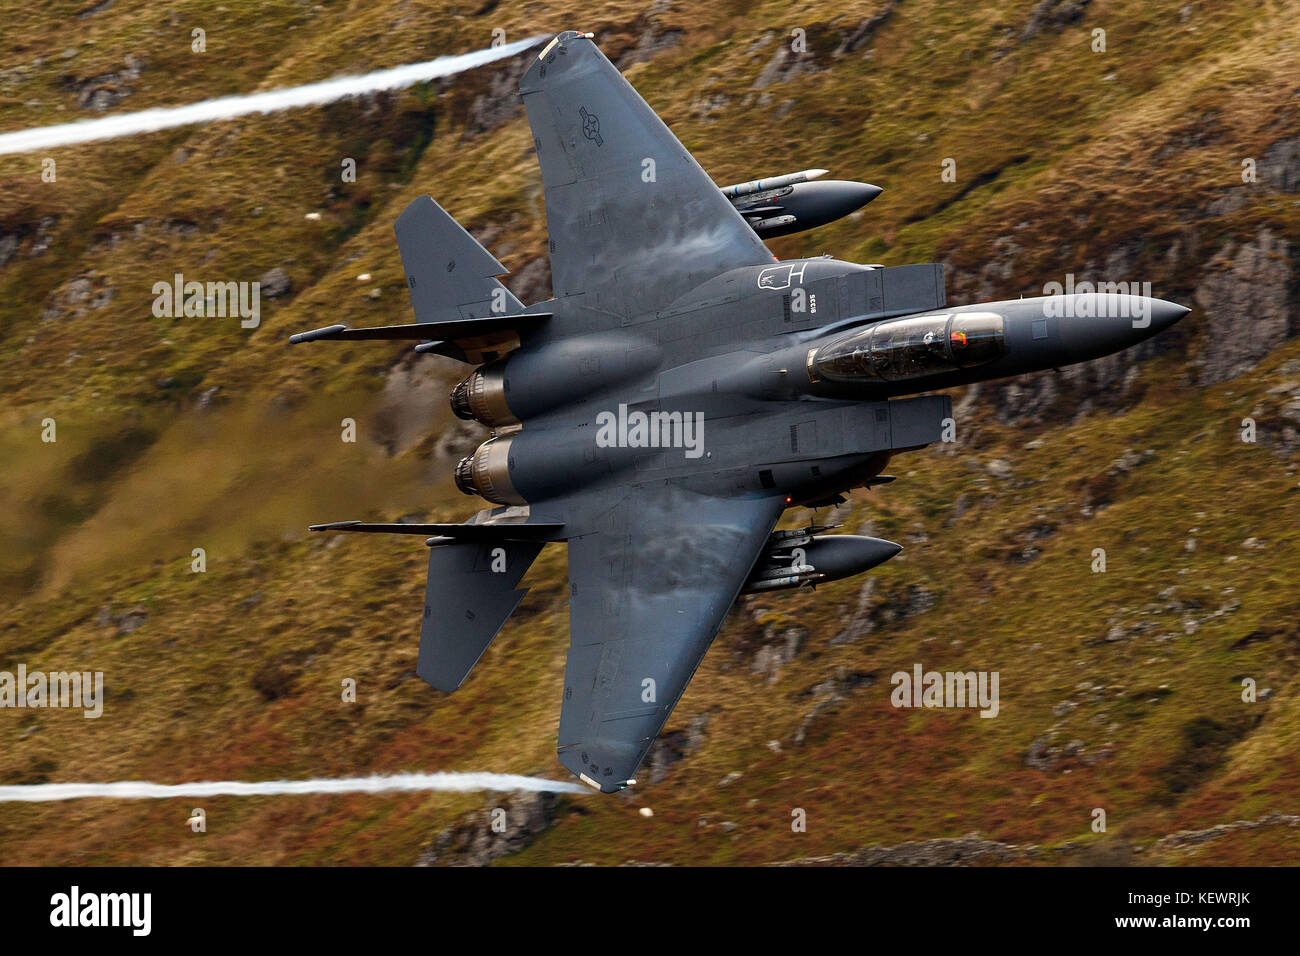 United States Air Force McDonnell-Douglas F-15E Strike Eagle (LN 91-335) from the 48th Fighter Wing, 494th Fighter Squadron based at RAF Lakenheath, England, flies low level through the Mach Loop, Machynlleth, Wales, United Kingdom Stock Photo